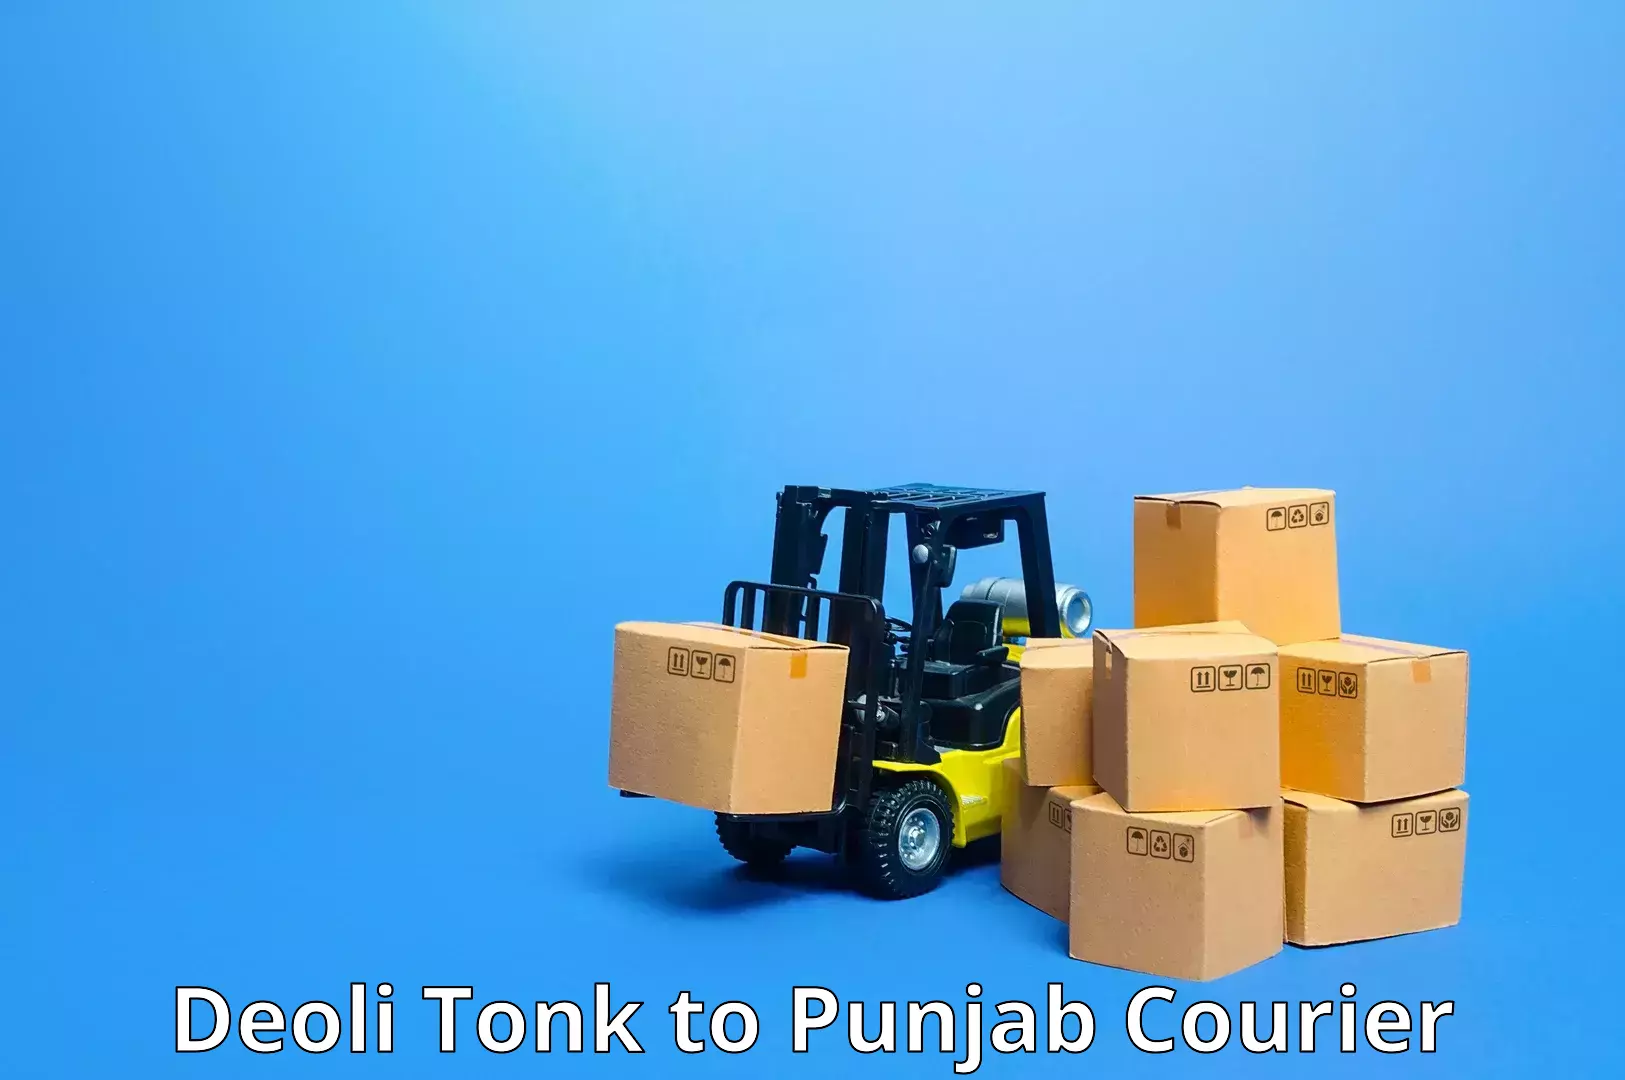 24/7 courier service Deoli Tonk to Beas